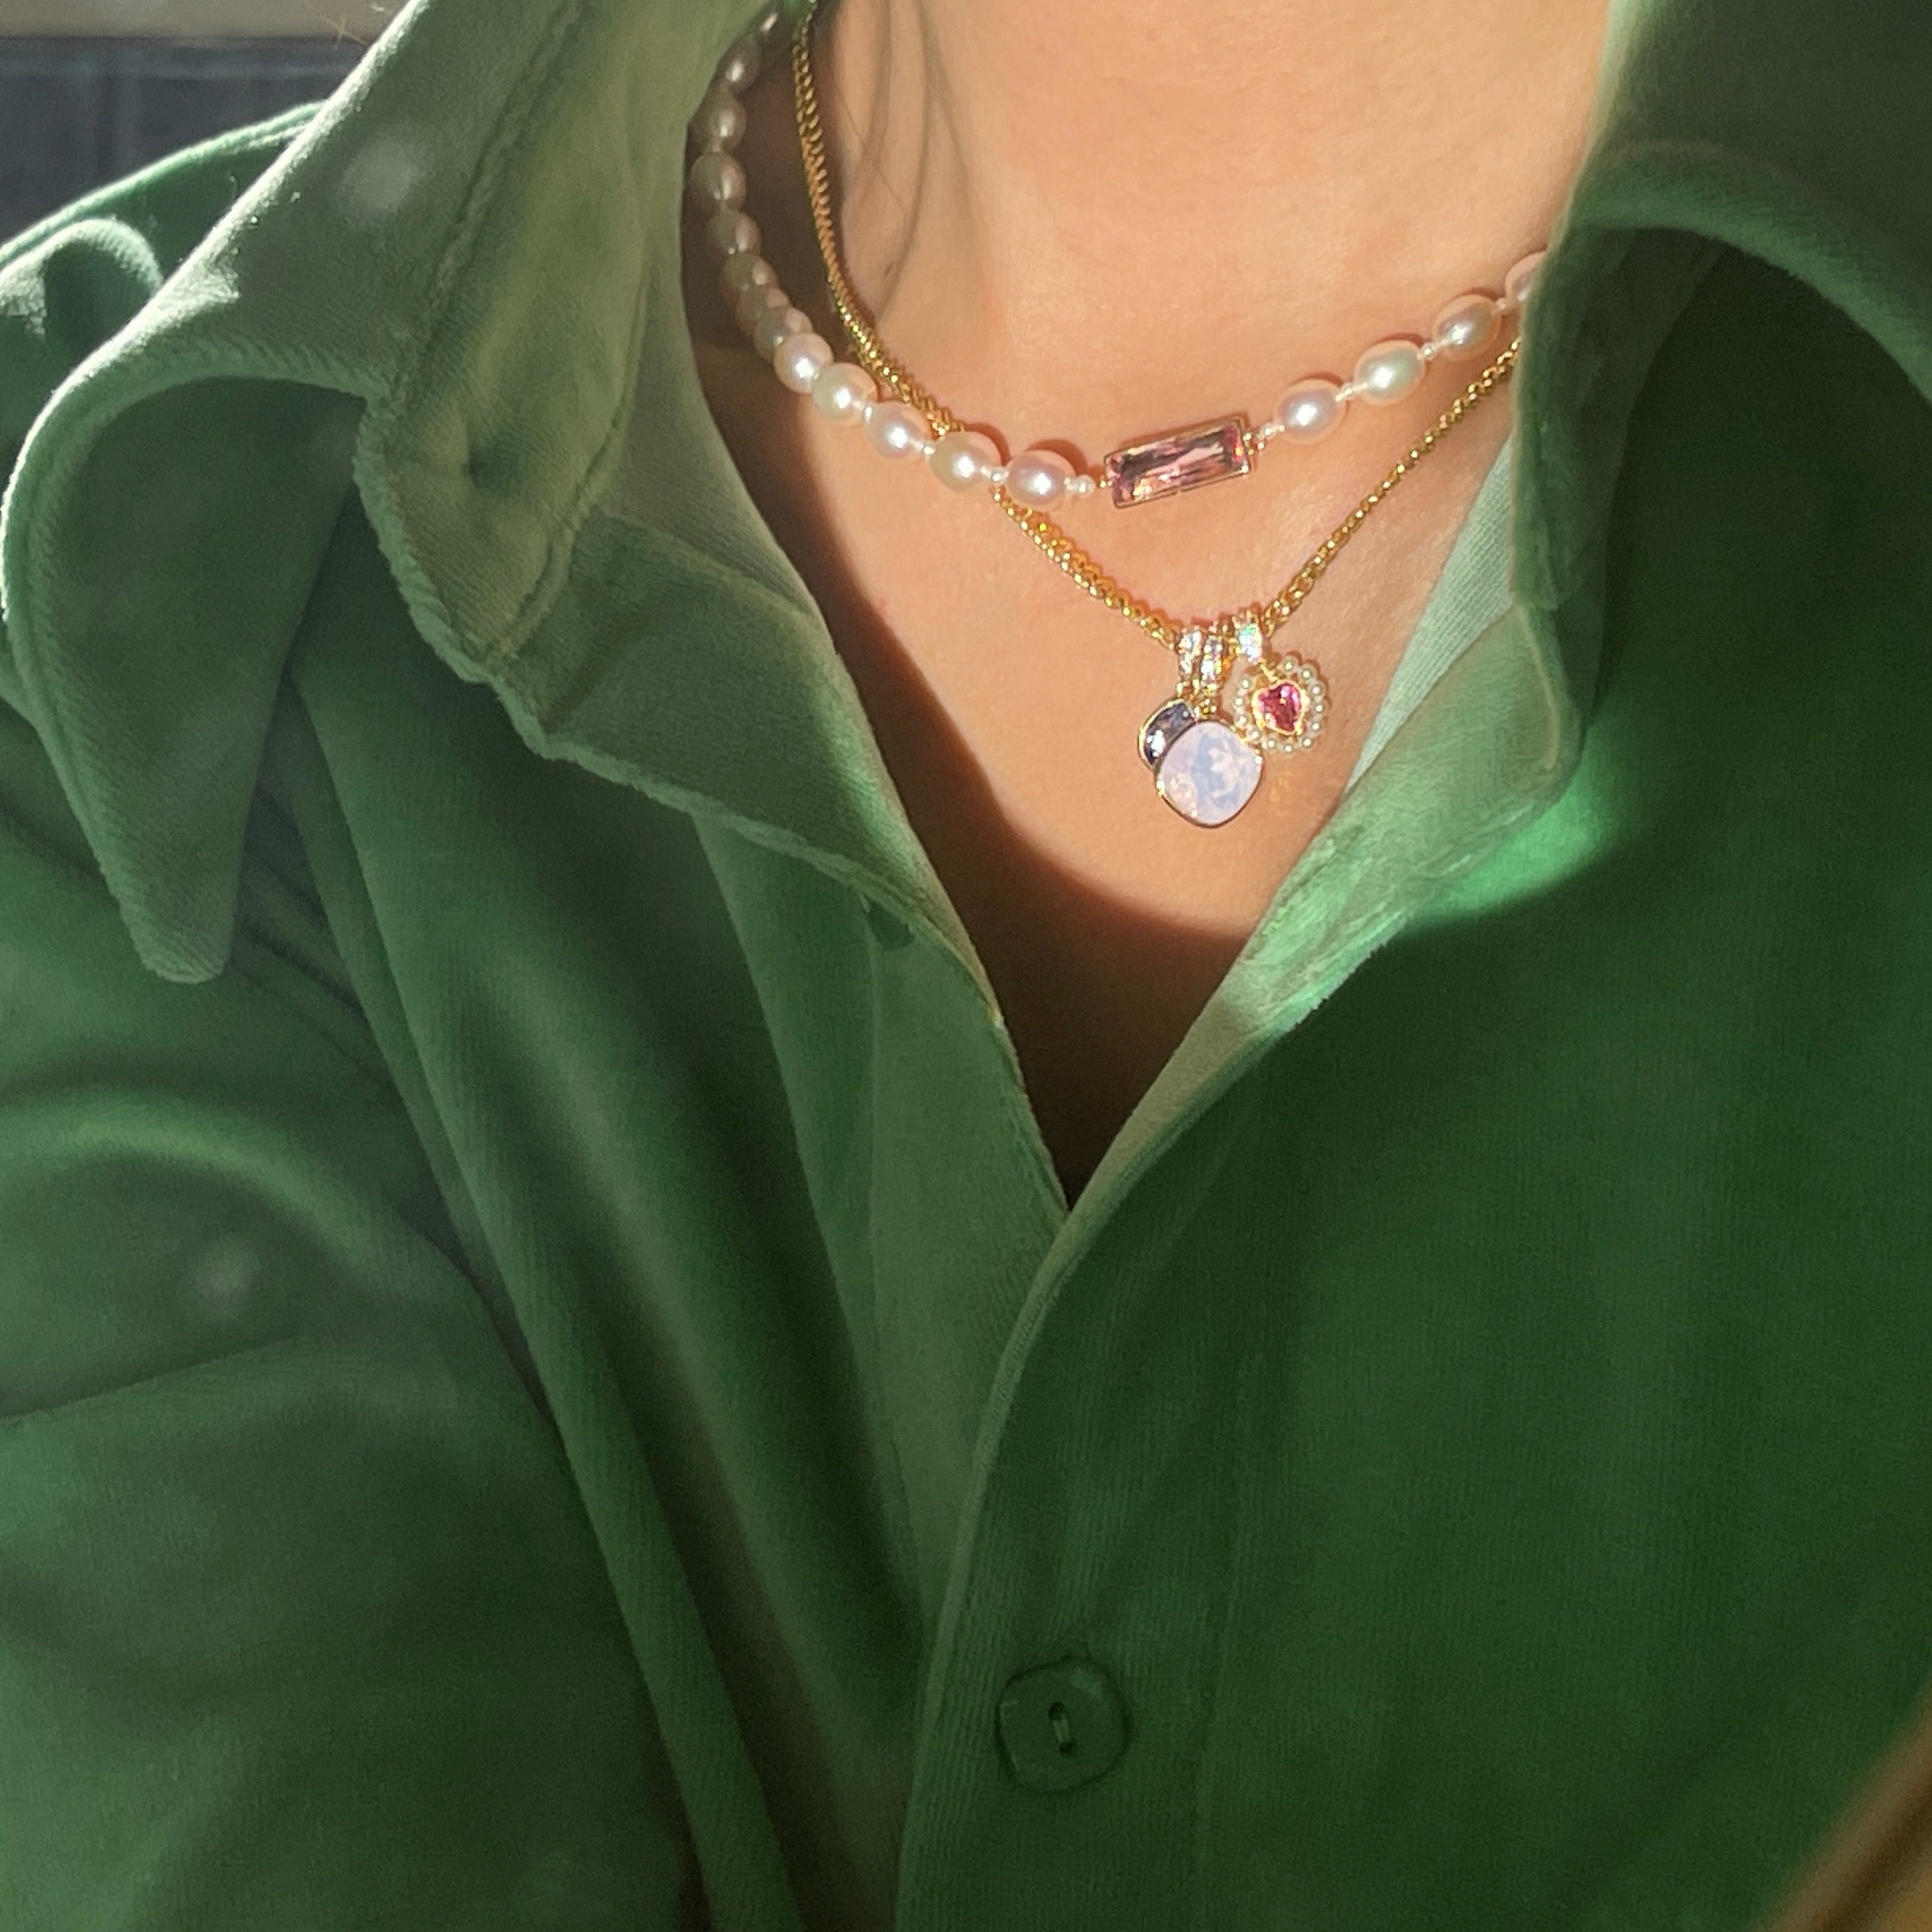 Influencer Program f Collection of Barbie's Jewelry- Girls' Heart-Dazzling Gemstones and Baroque Pearl Necklaces